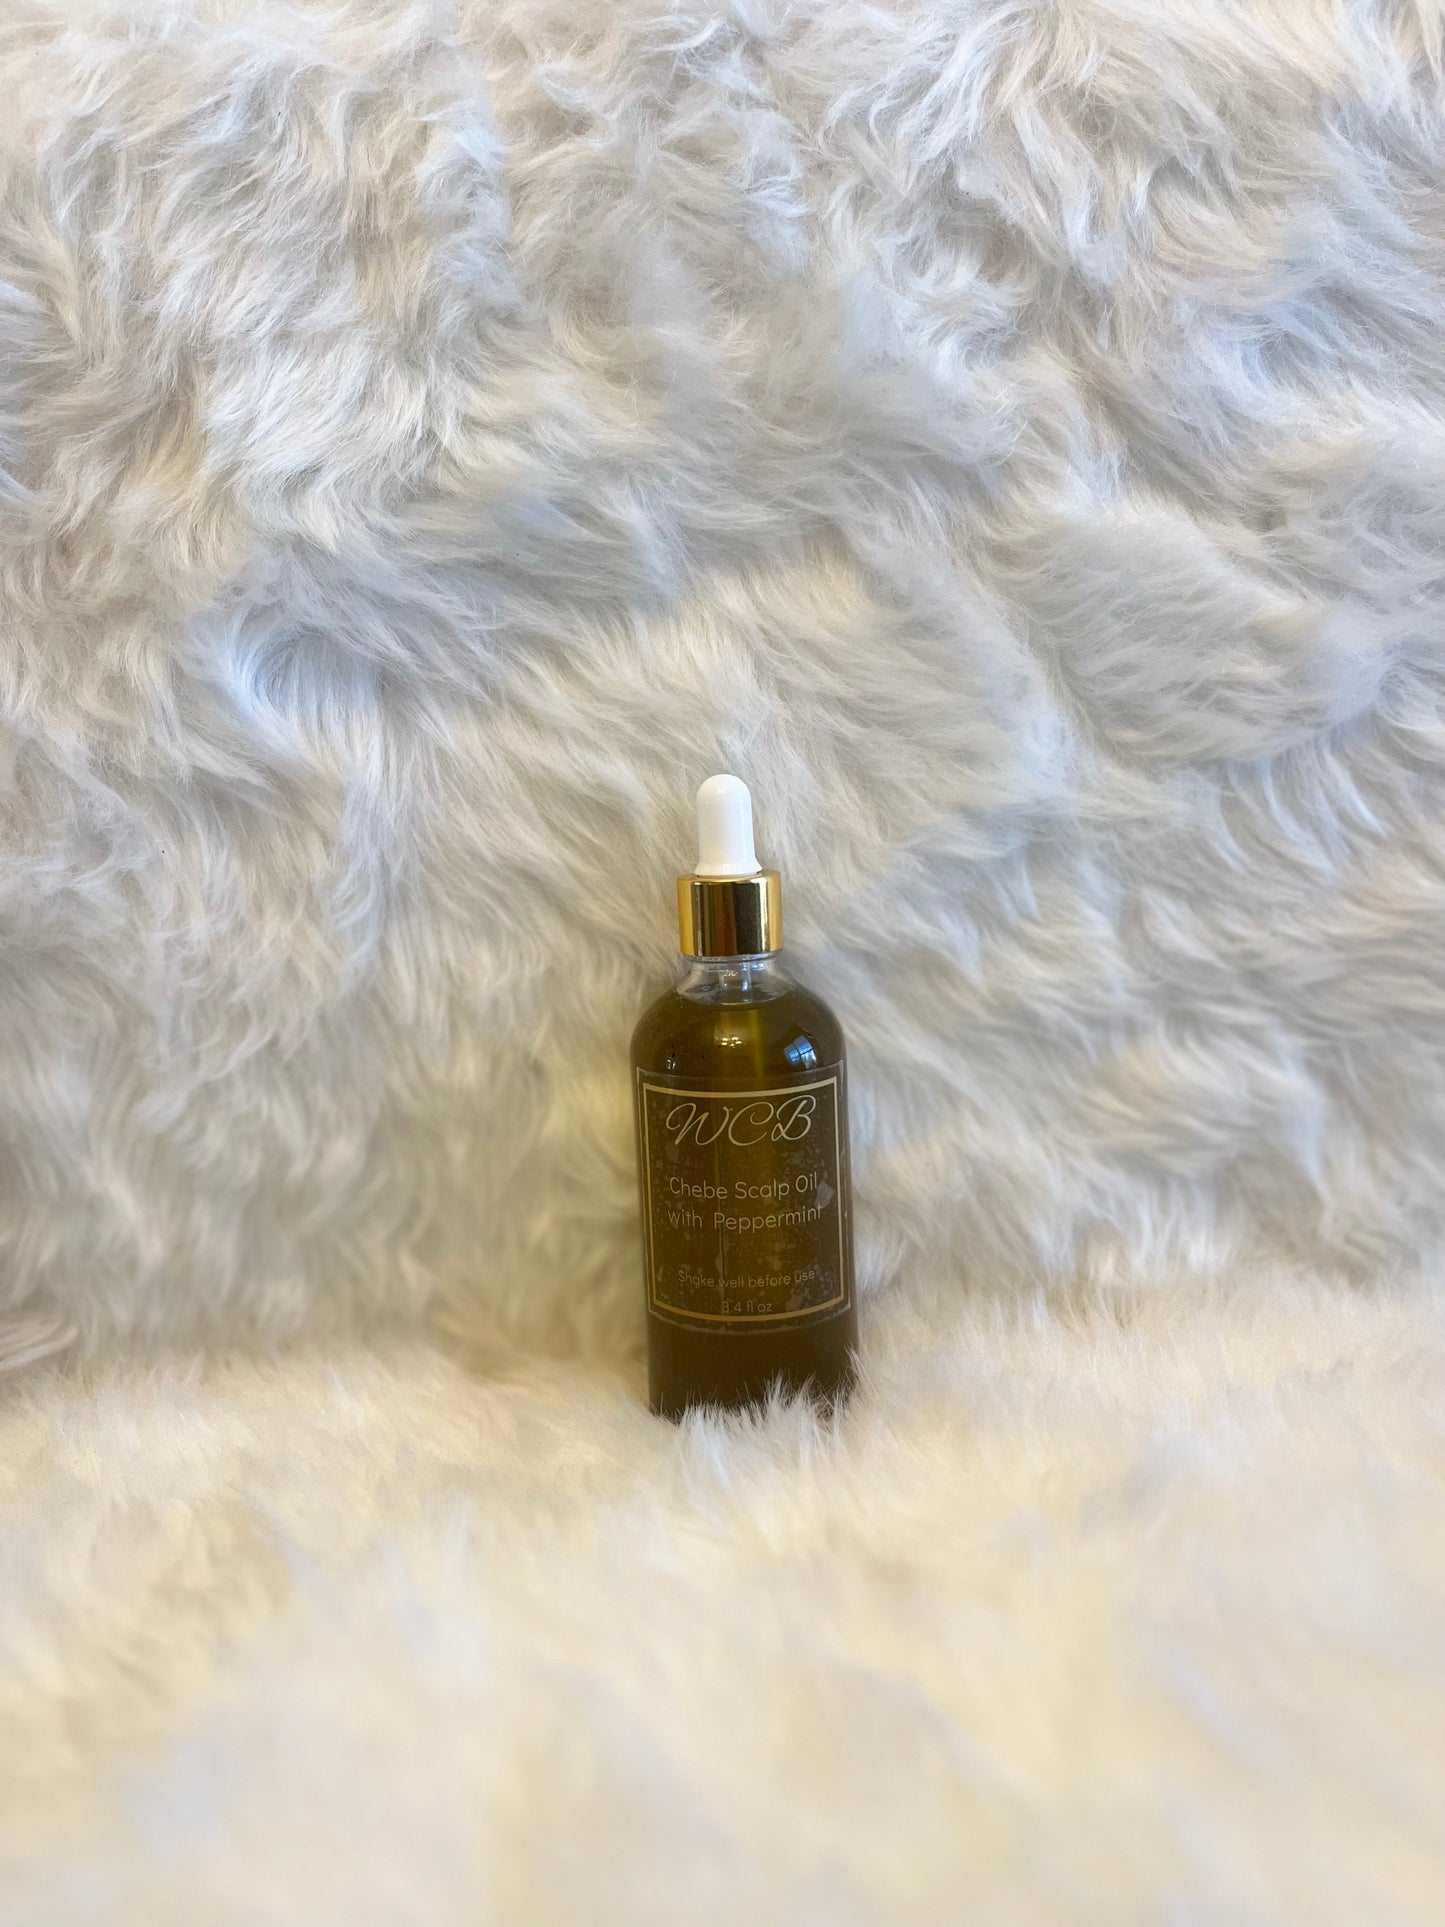 Chebe Scalp Oil with Peppermint